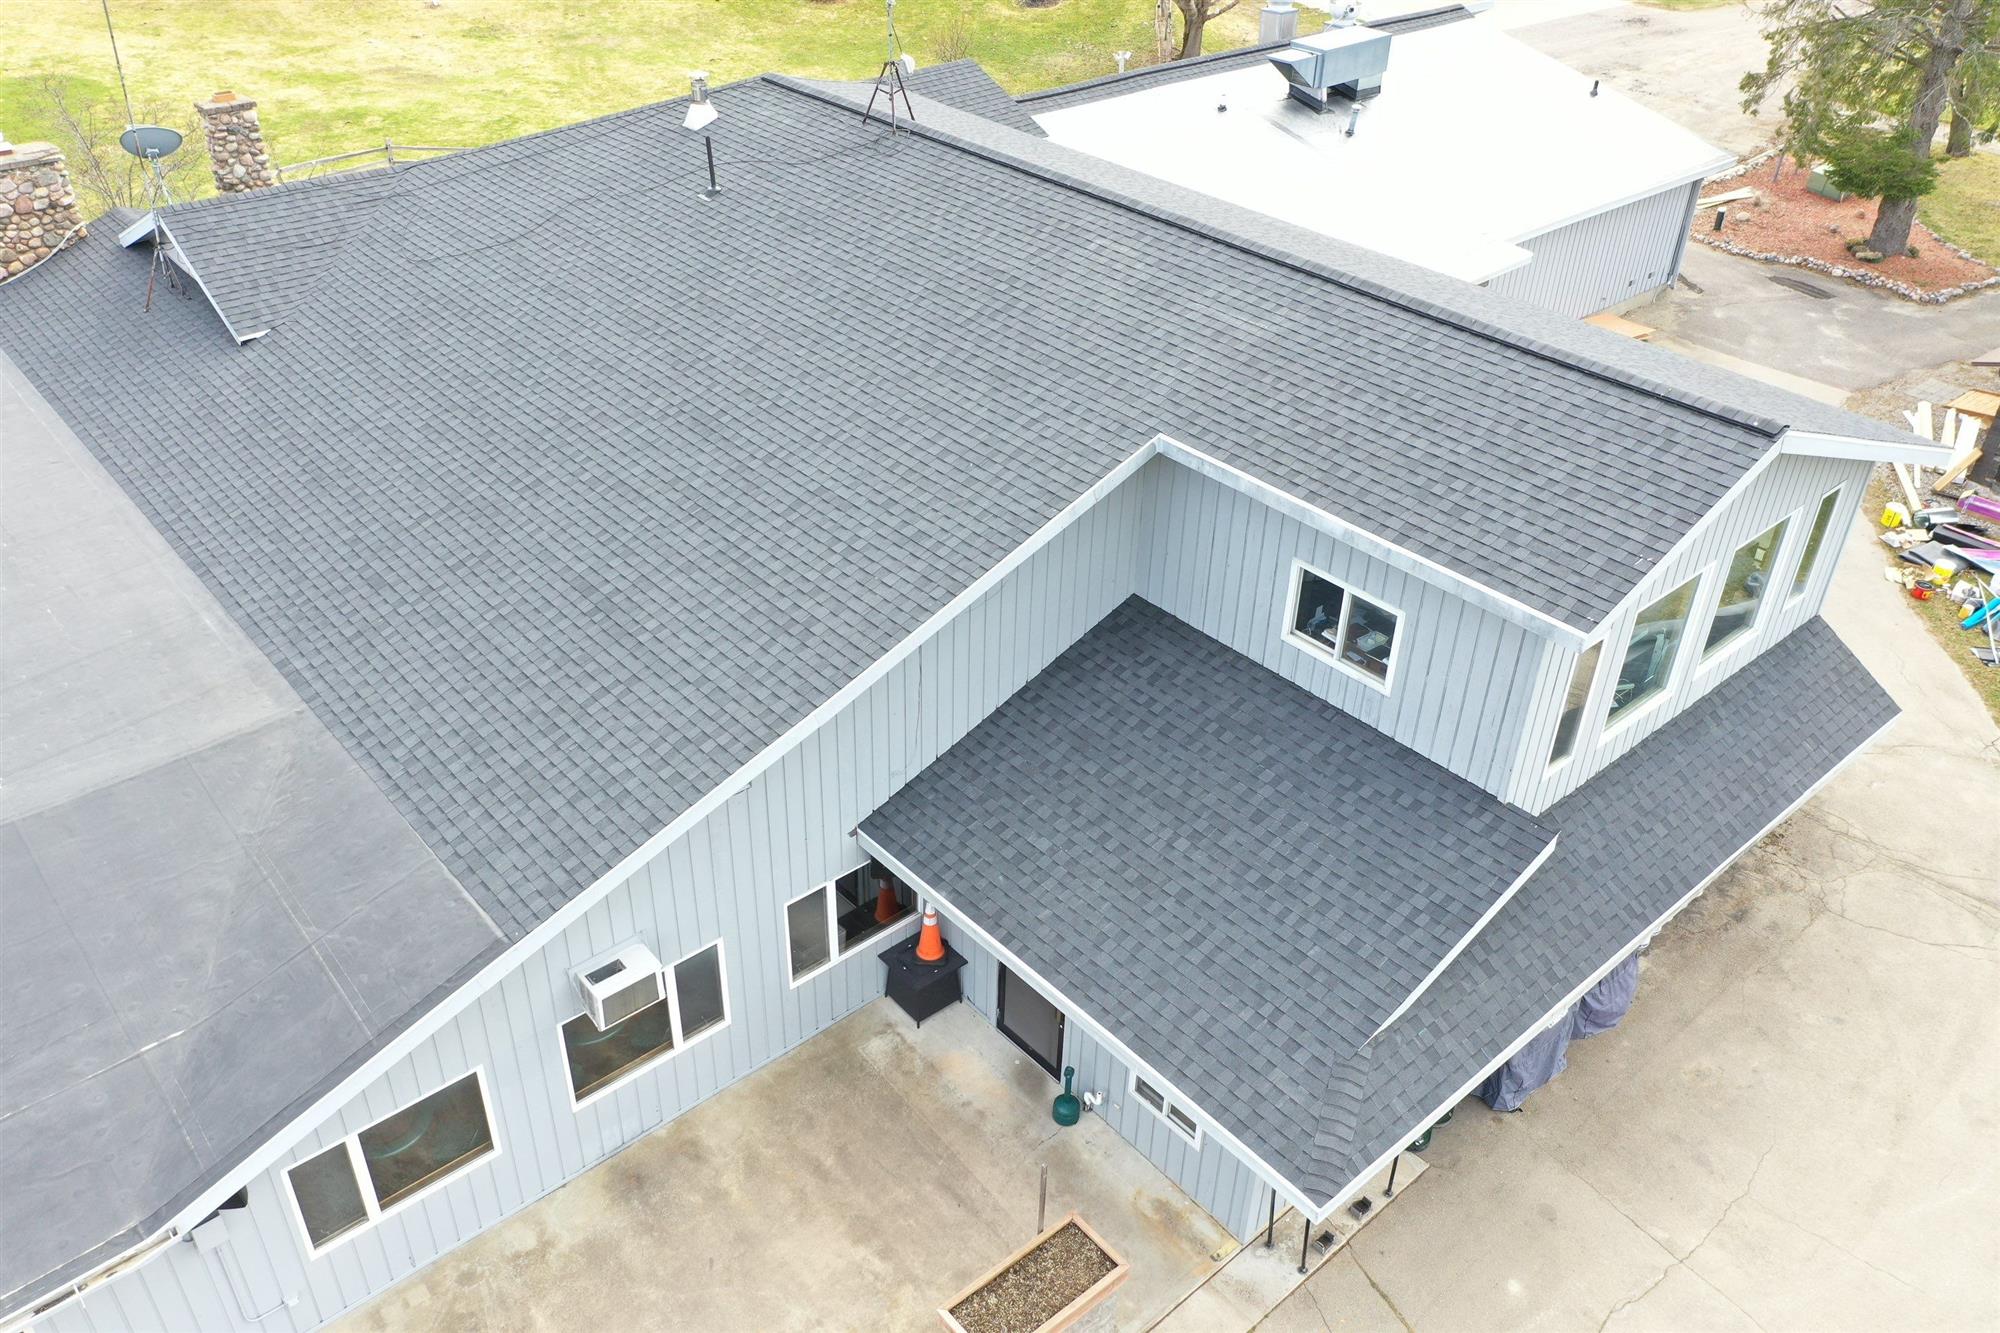 Asphalt shingle roof replacement contractors in Green Bay, WI